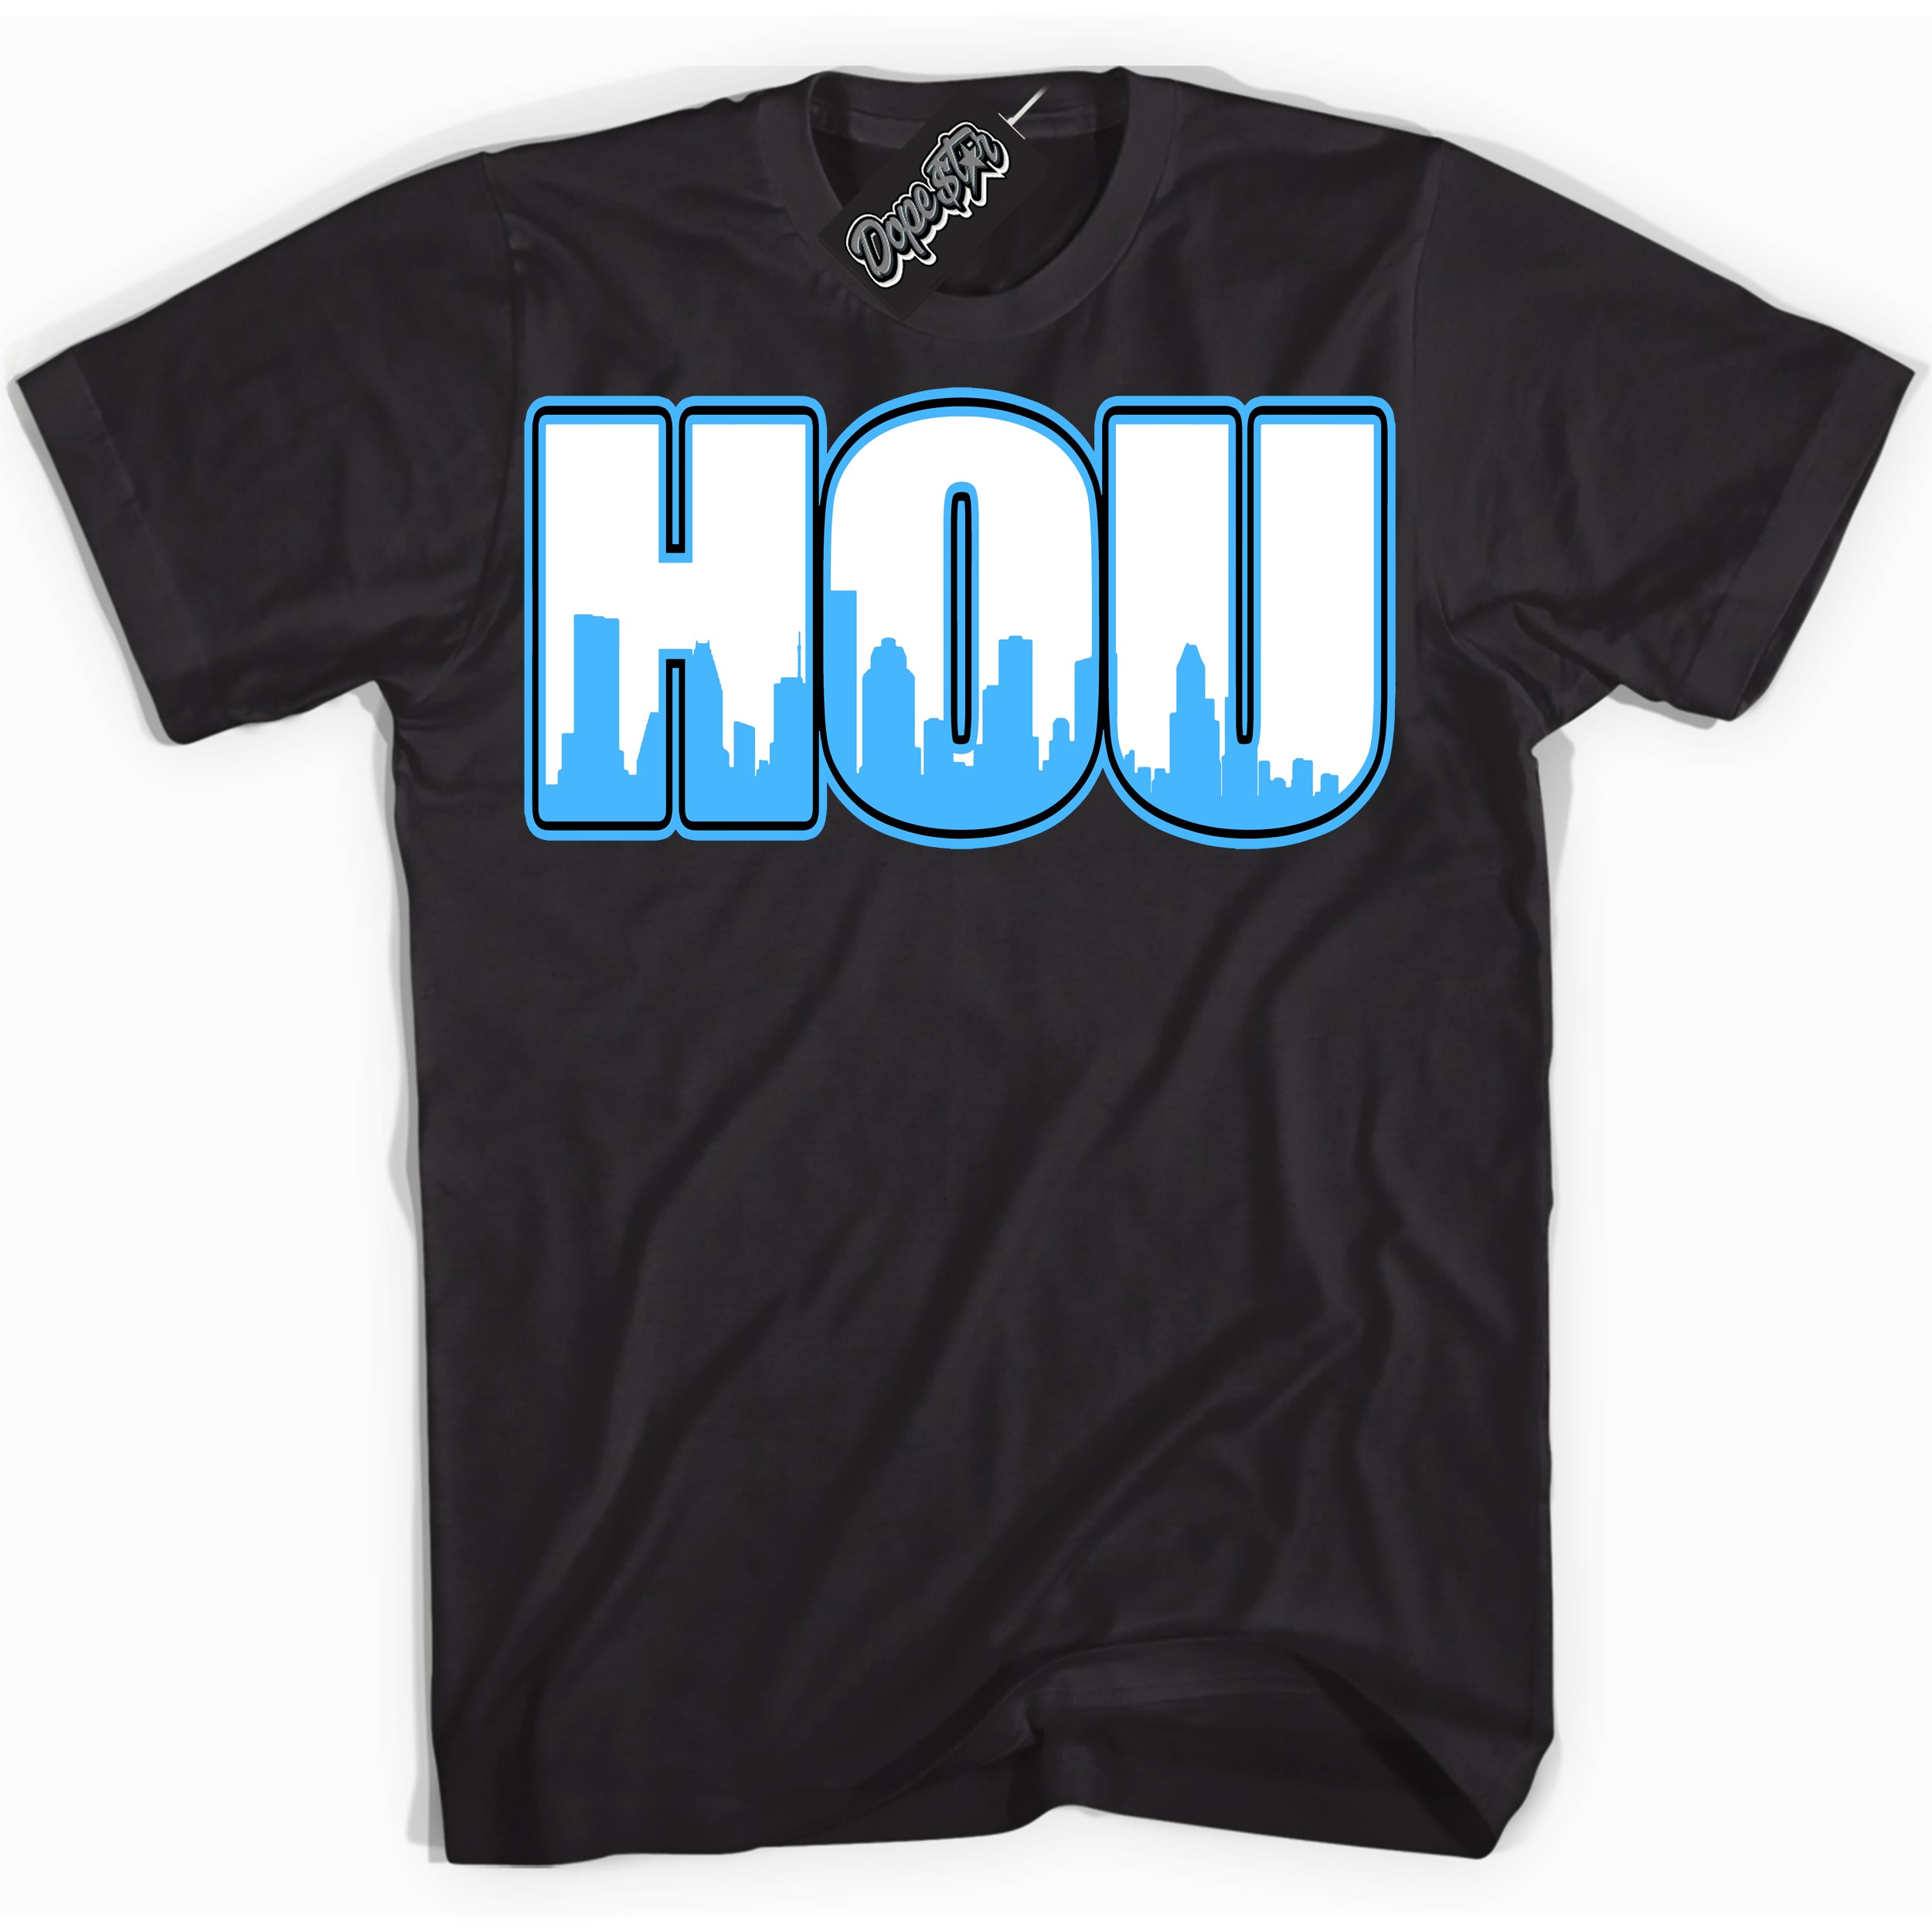 Cool Black graphic tee with “ Houston ” design, that perfectly matches Powder Blue 9s sneakers 